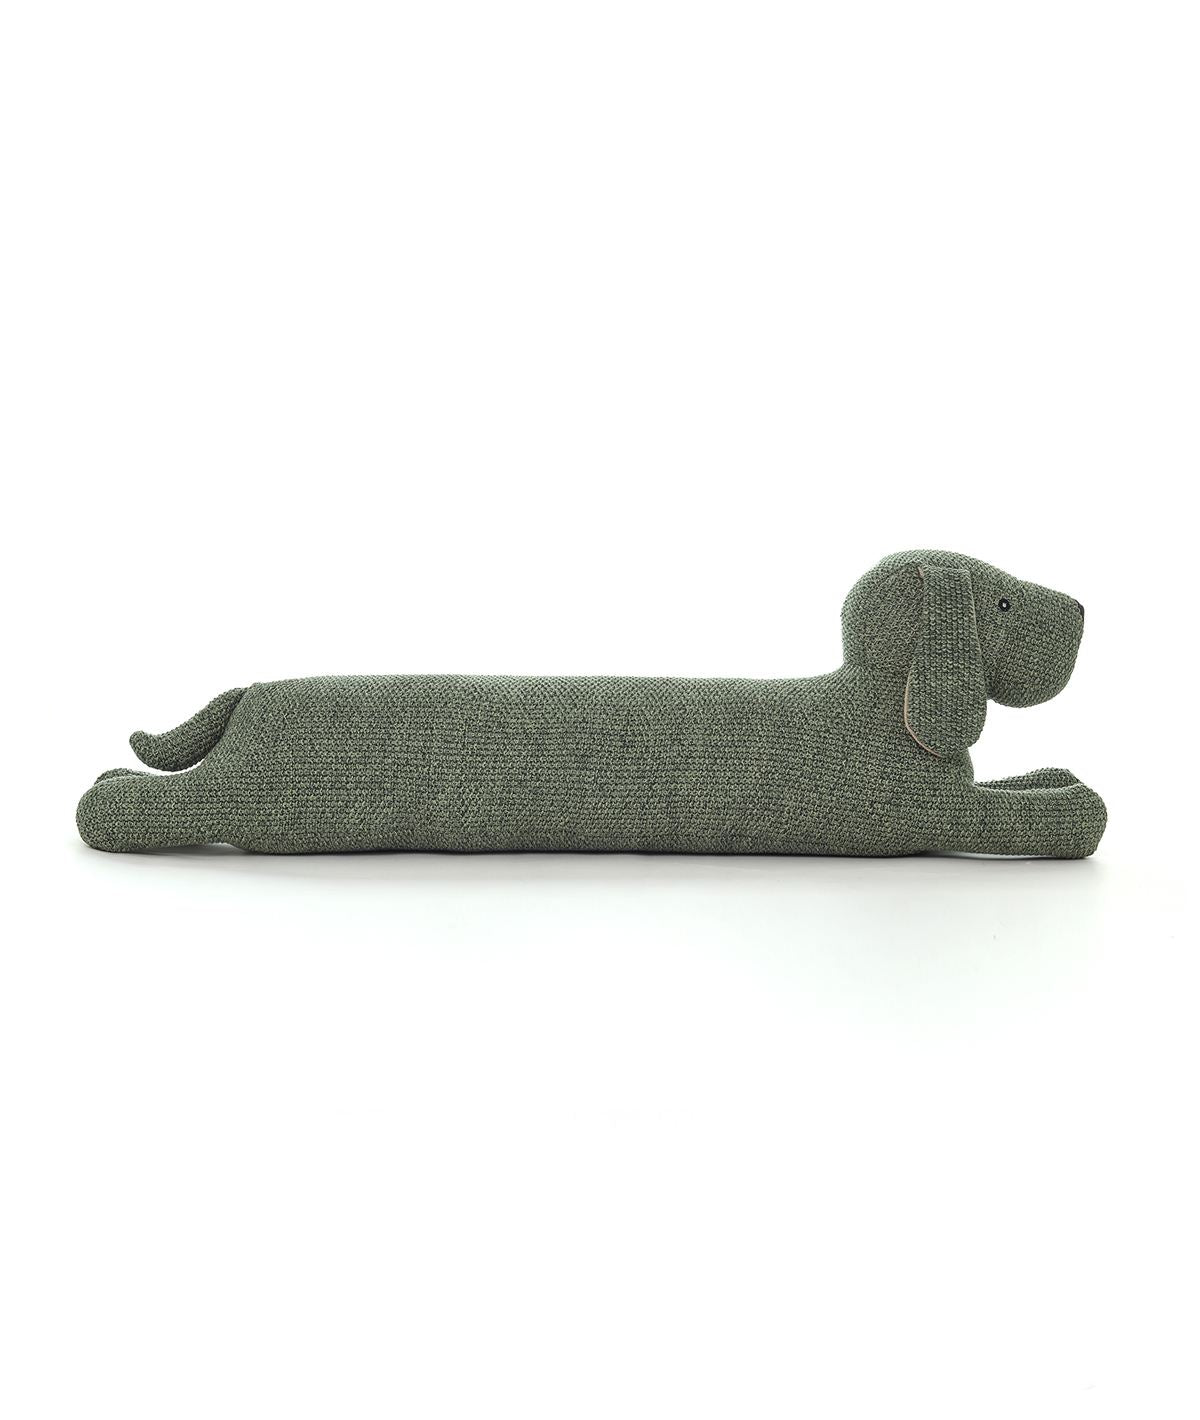 Max Dog Cotton Knitted Stuffed Soft Toy (Bermuda Green)